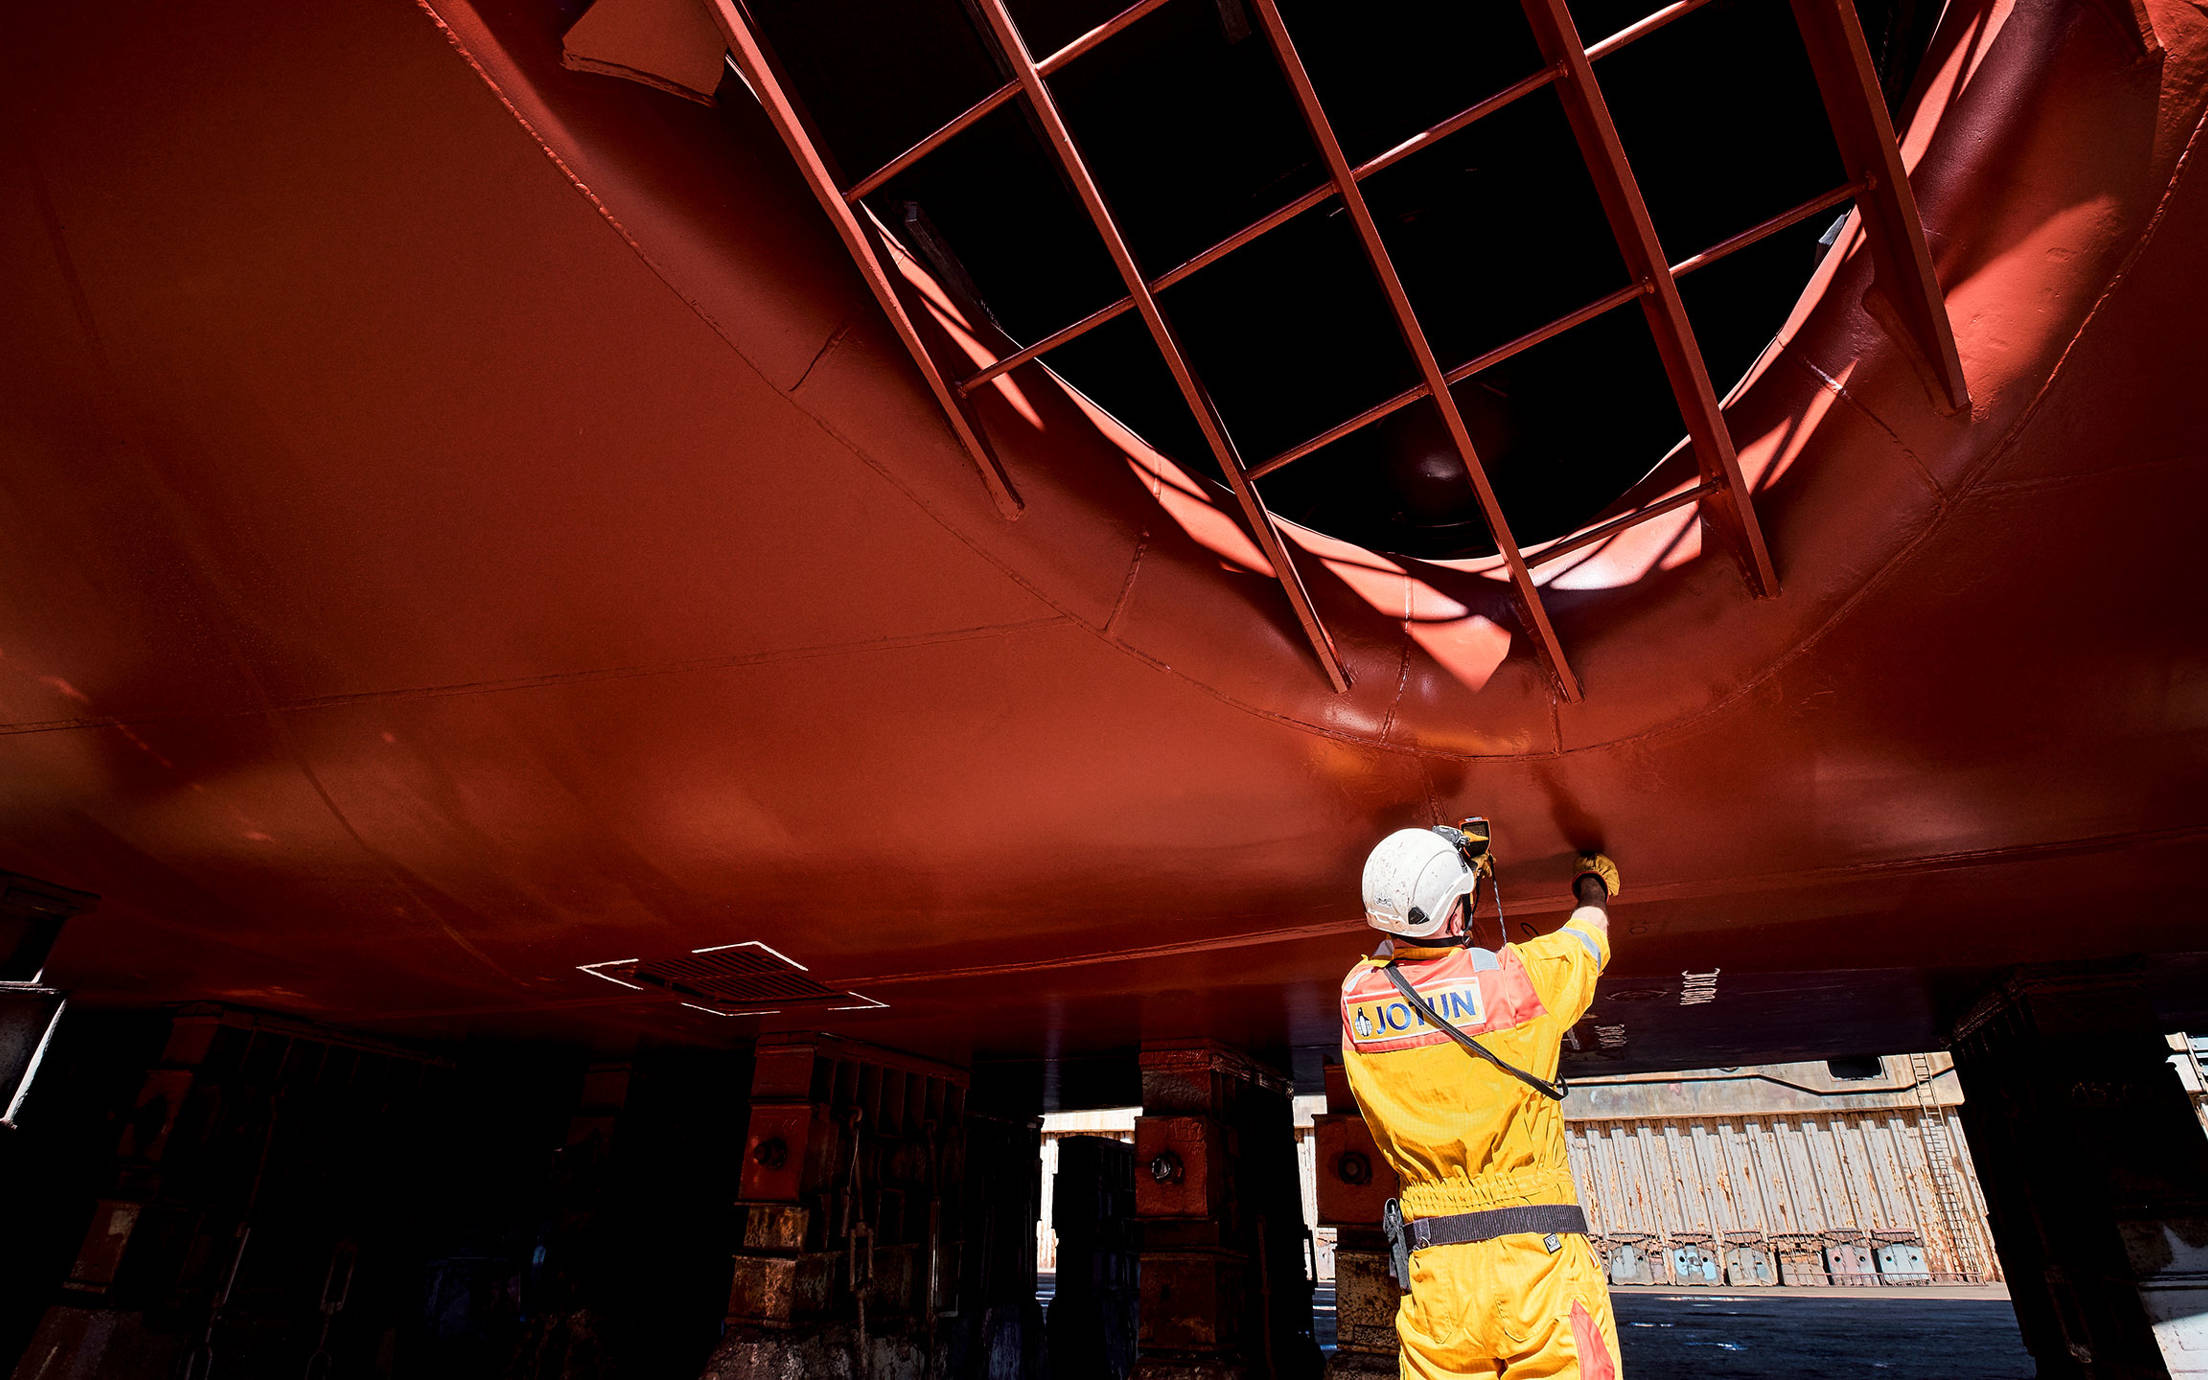 A technical inspector measuring thickness of the coating on a ship hull